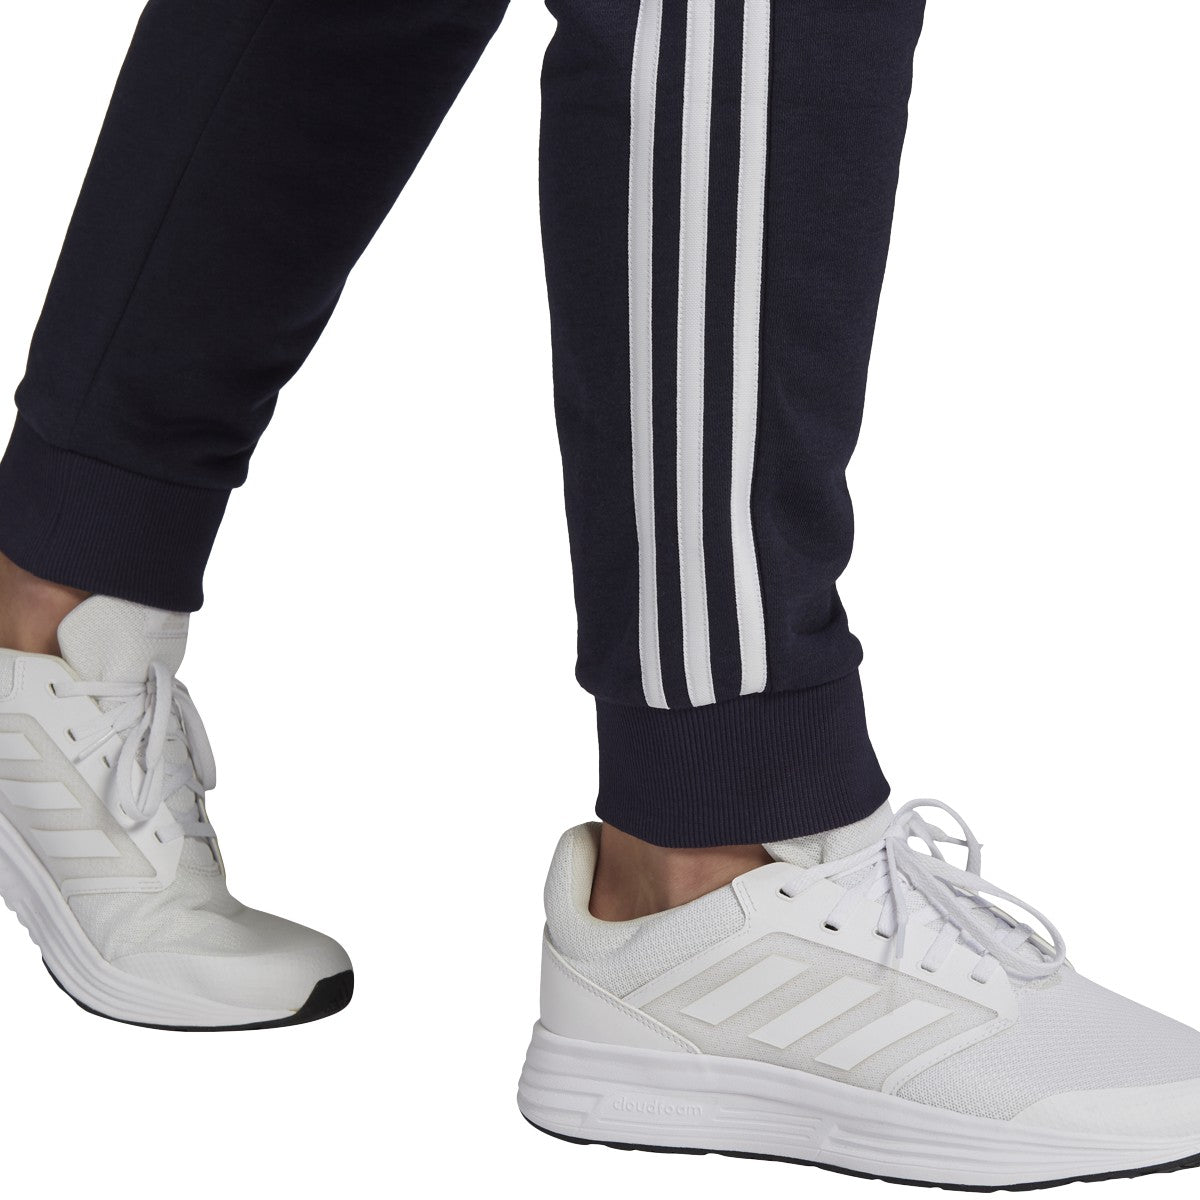 adidas Essentials Tapered Cuff Zone Stripes LEGEND Pants INK/WHITE 3 Soccer – GK88 